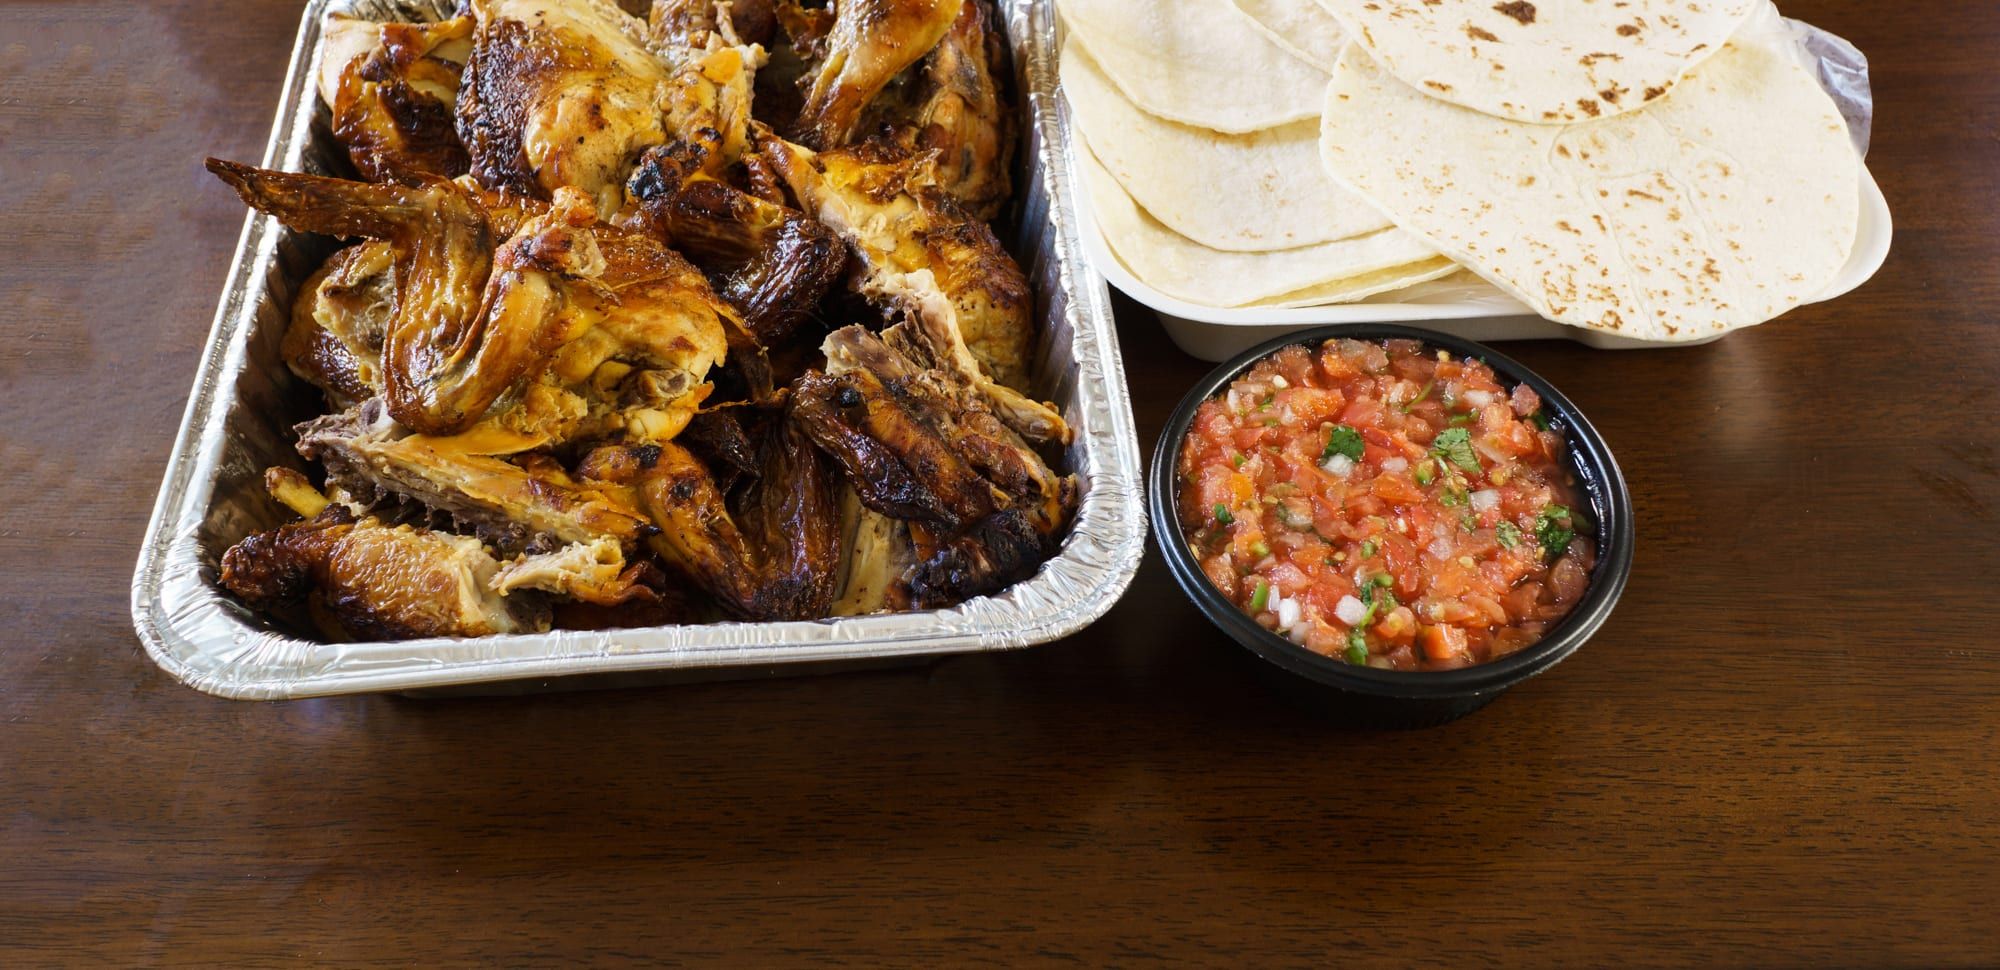 El Pollo Loco Catering: Authentically Mexican Chicken and More - Lunch Rush